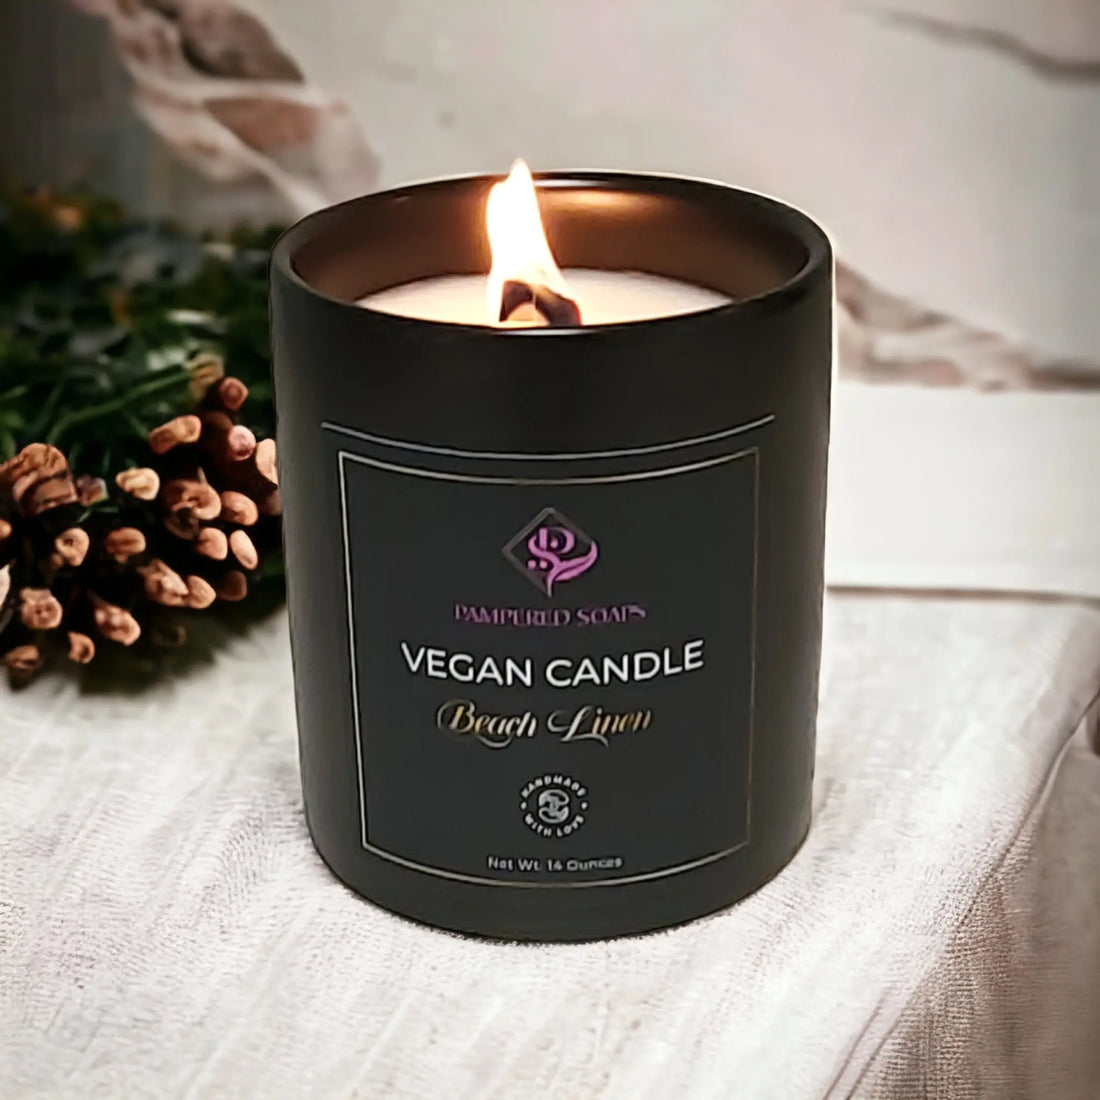 Vegan-Candles-Setting-the-Mood-without-Compromise Pampered Soaps